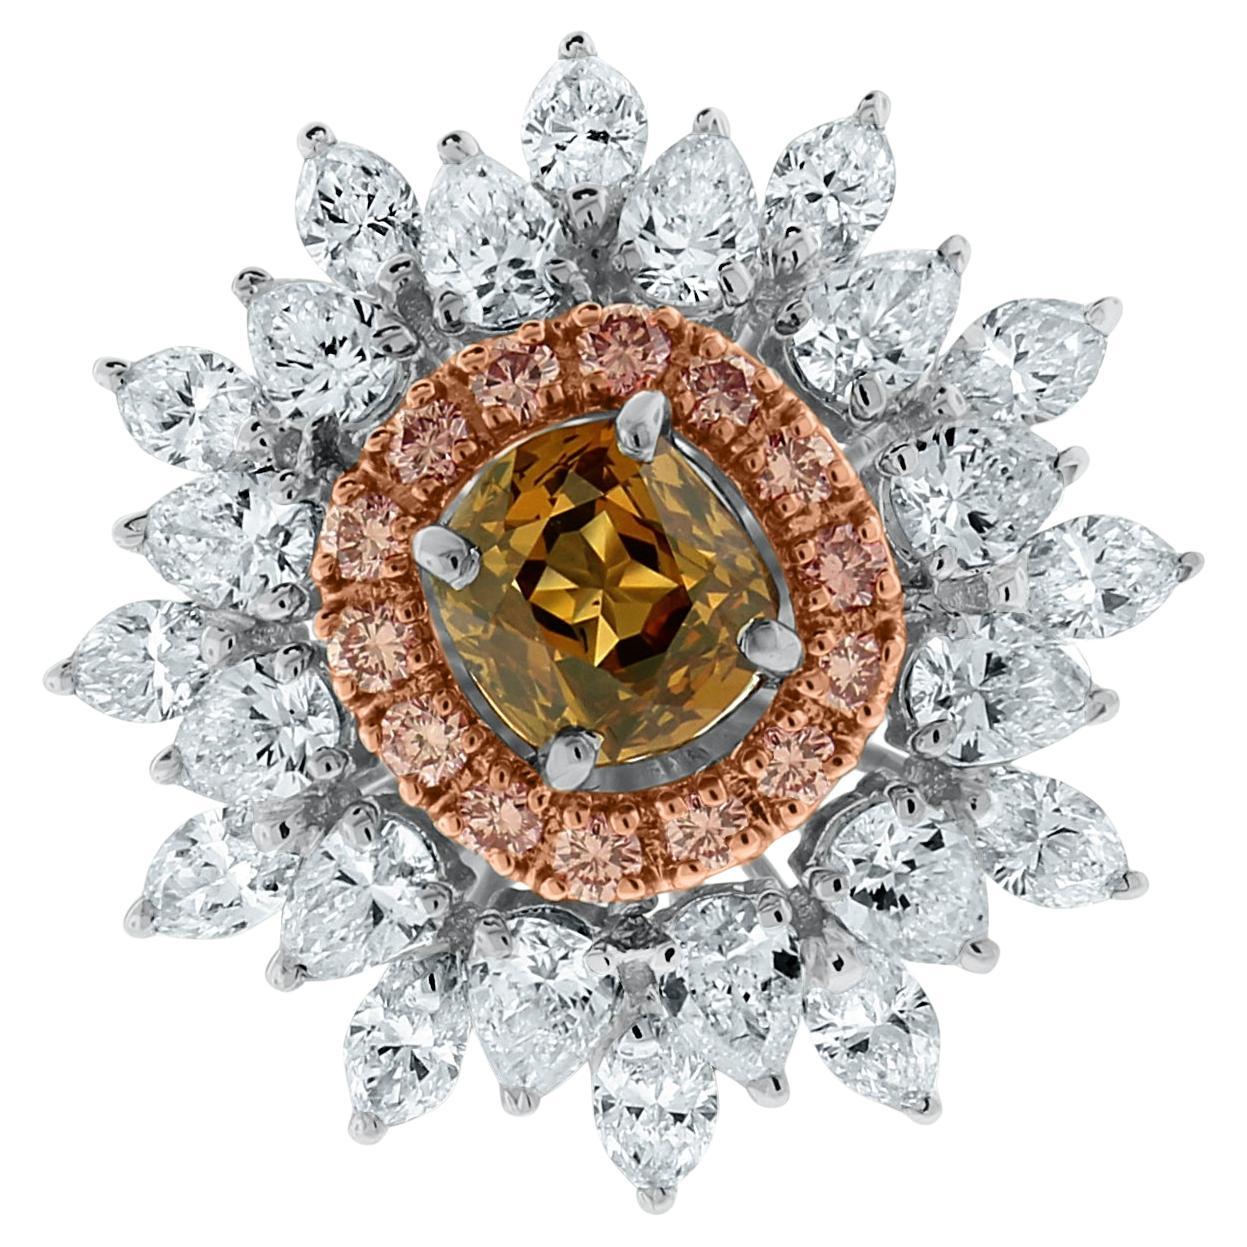 Beauvince Blossoms Diamond Cocktail Ring '3.09 Ct Diamonds' in Gold